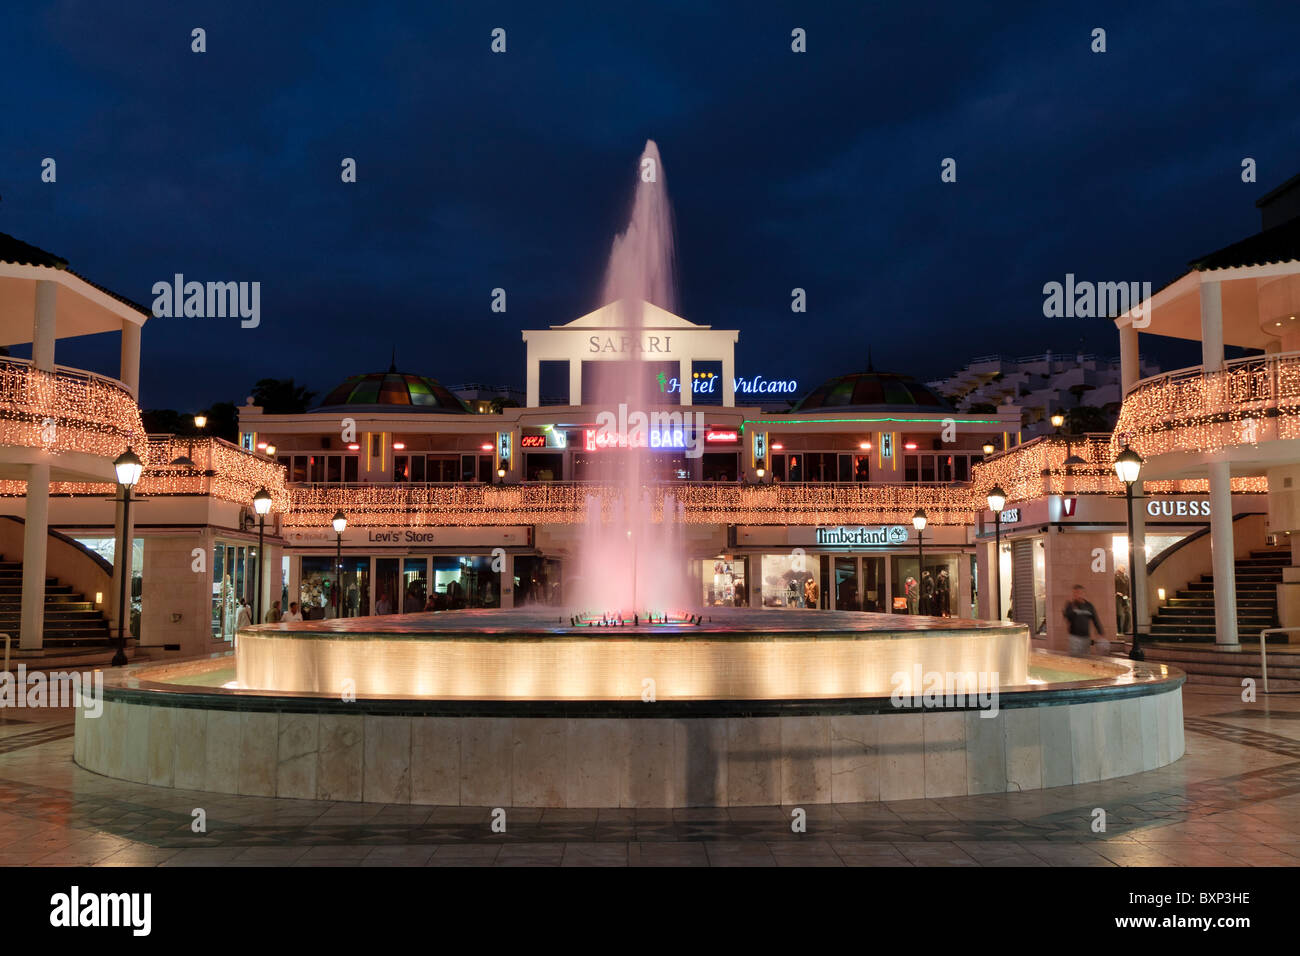 Fountain at the Safari shopping centre in Las Americas Tenerife Canary  Islands Spain Stock Photo - Alamy